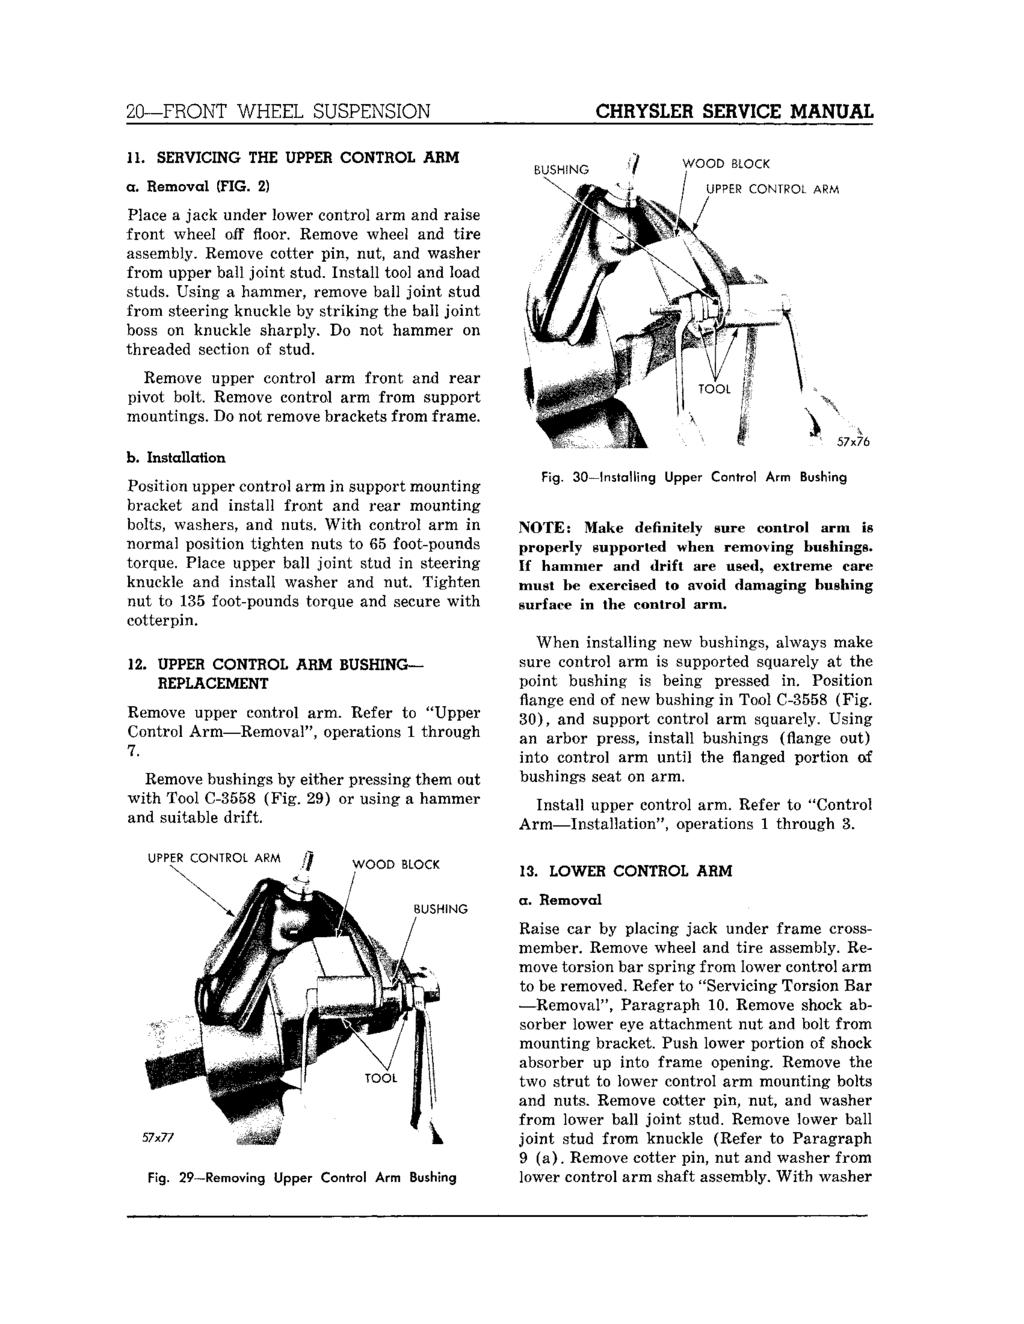 20 FRONT WHEEL SUSPENSION CHRYSLER SERVICE MANUAL 11. SERVICING THE UPPER CONTROL ARM a. Removal (FIG. 2) Place a jack under lower control arm and raise front wheel off floor.